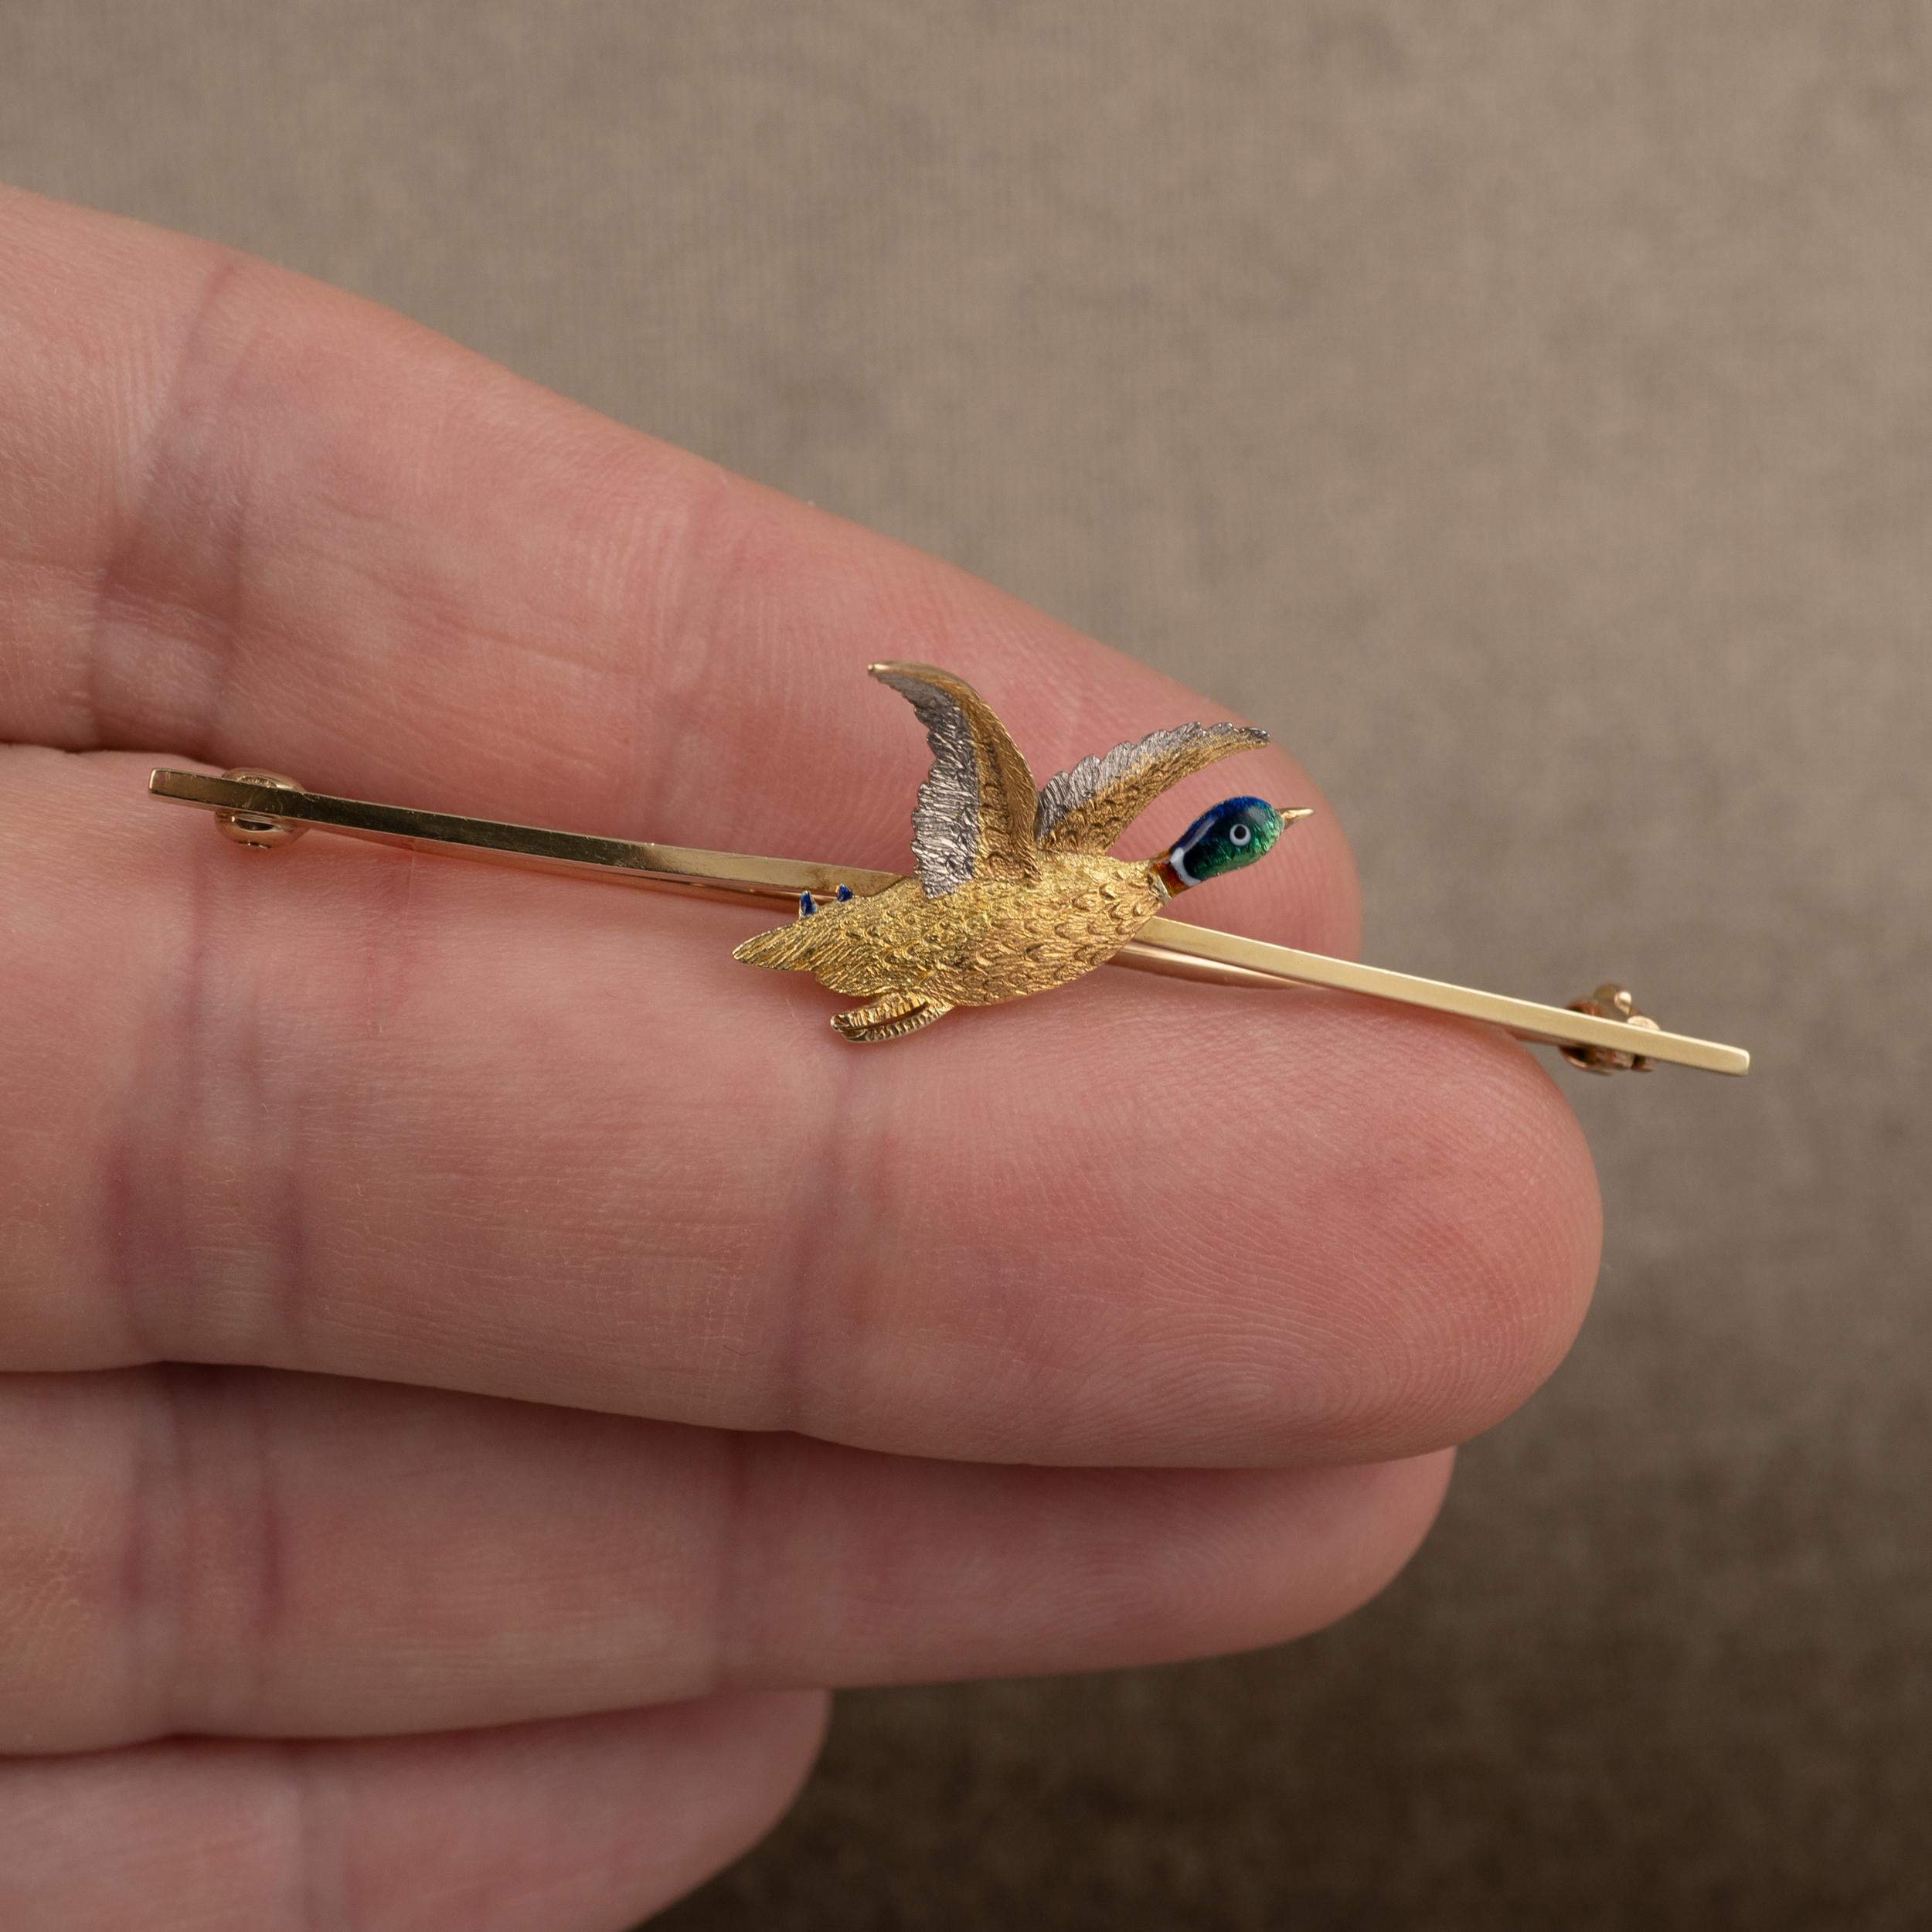 Art Deco 18K gold, platinum, and enamel flying Mallard duck brooch, circa 1930s.

The Mallard duck, shown in flight, has been beautifully crafted and shows fine detail to the body and wings. The gold wings are brushed complimenting platinum. The